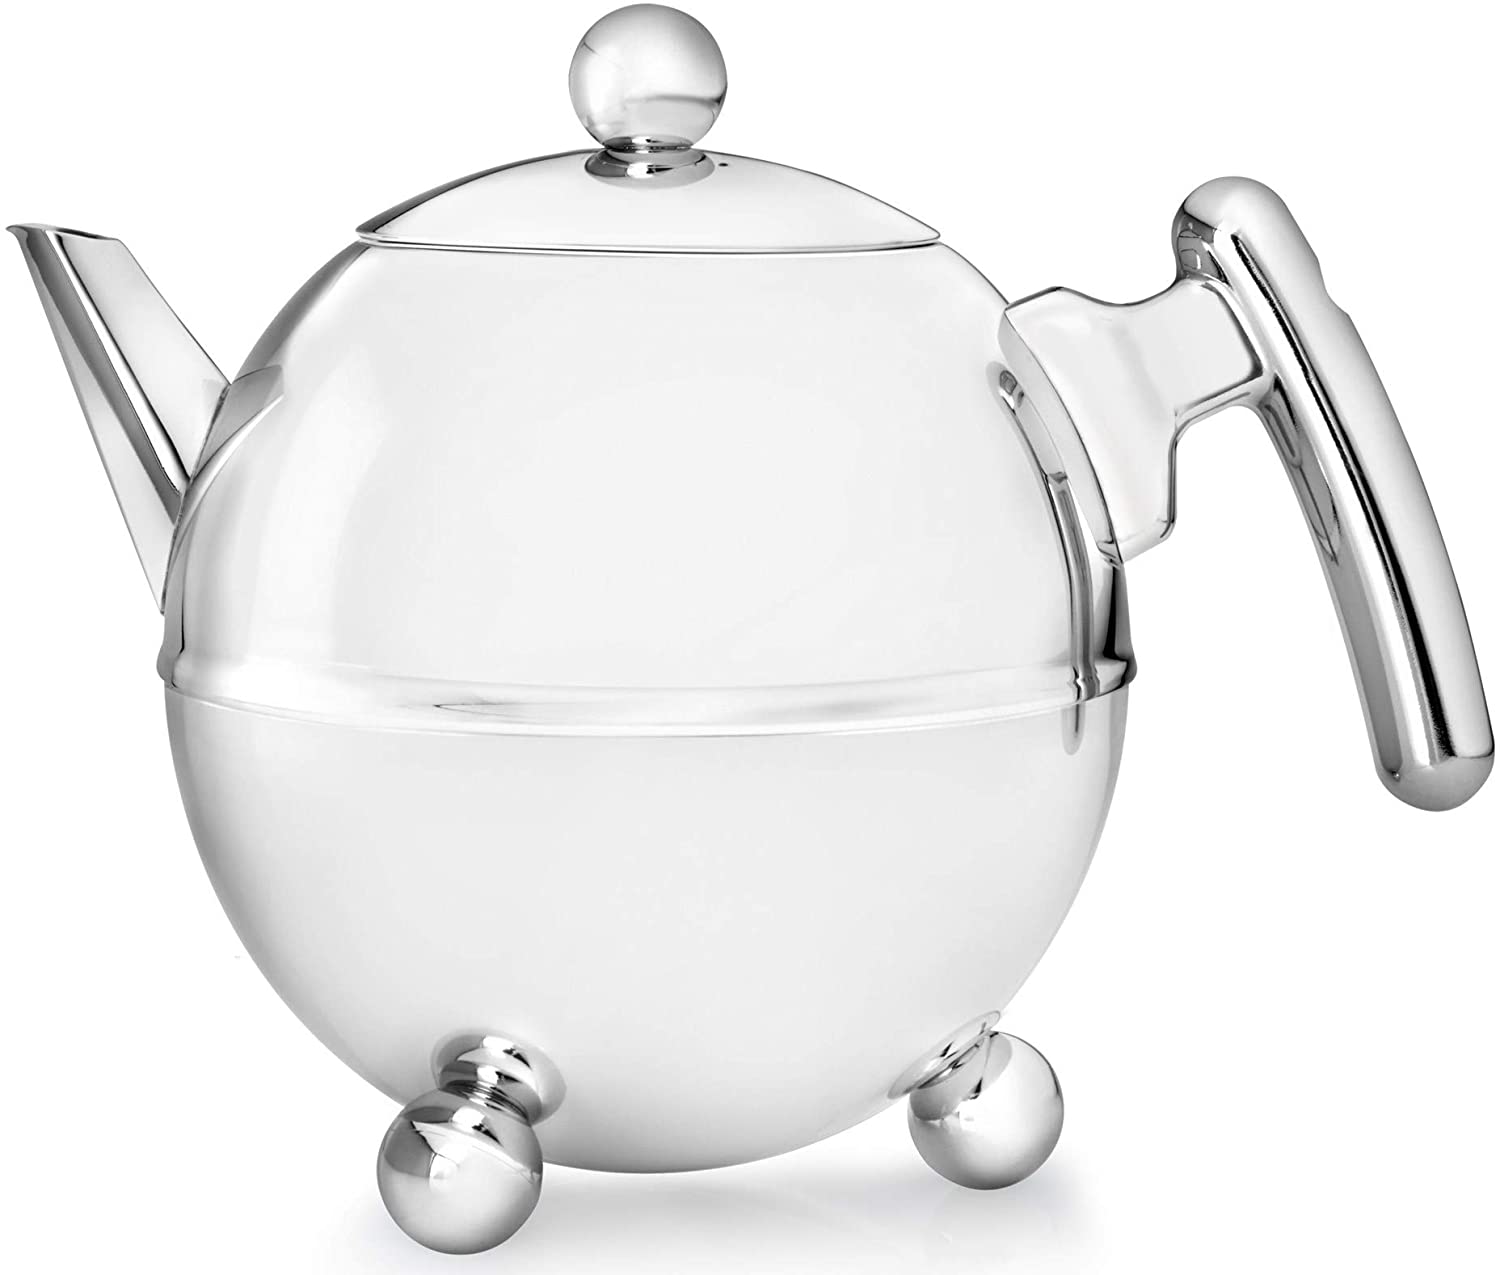 Bredemeijer 1.5 L Stainless Steel Teapot Bella Ronde with Chromium Fittings, Silver